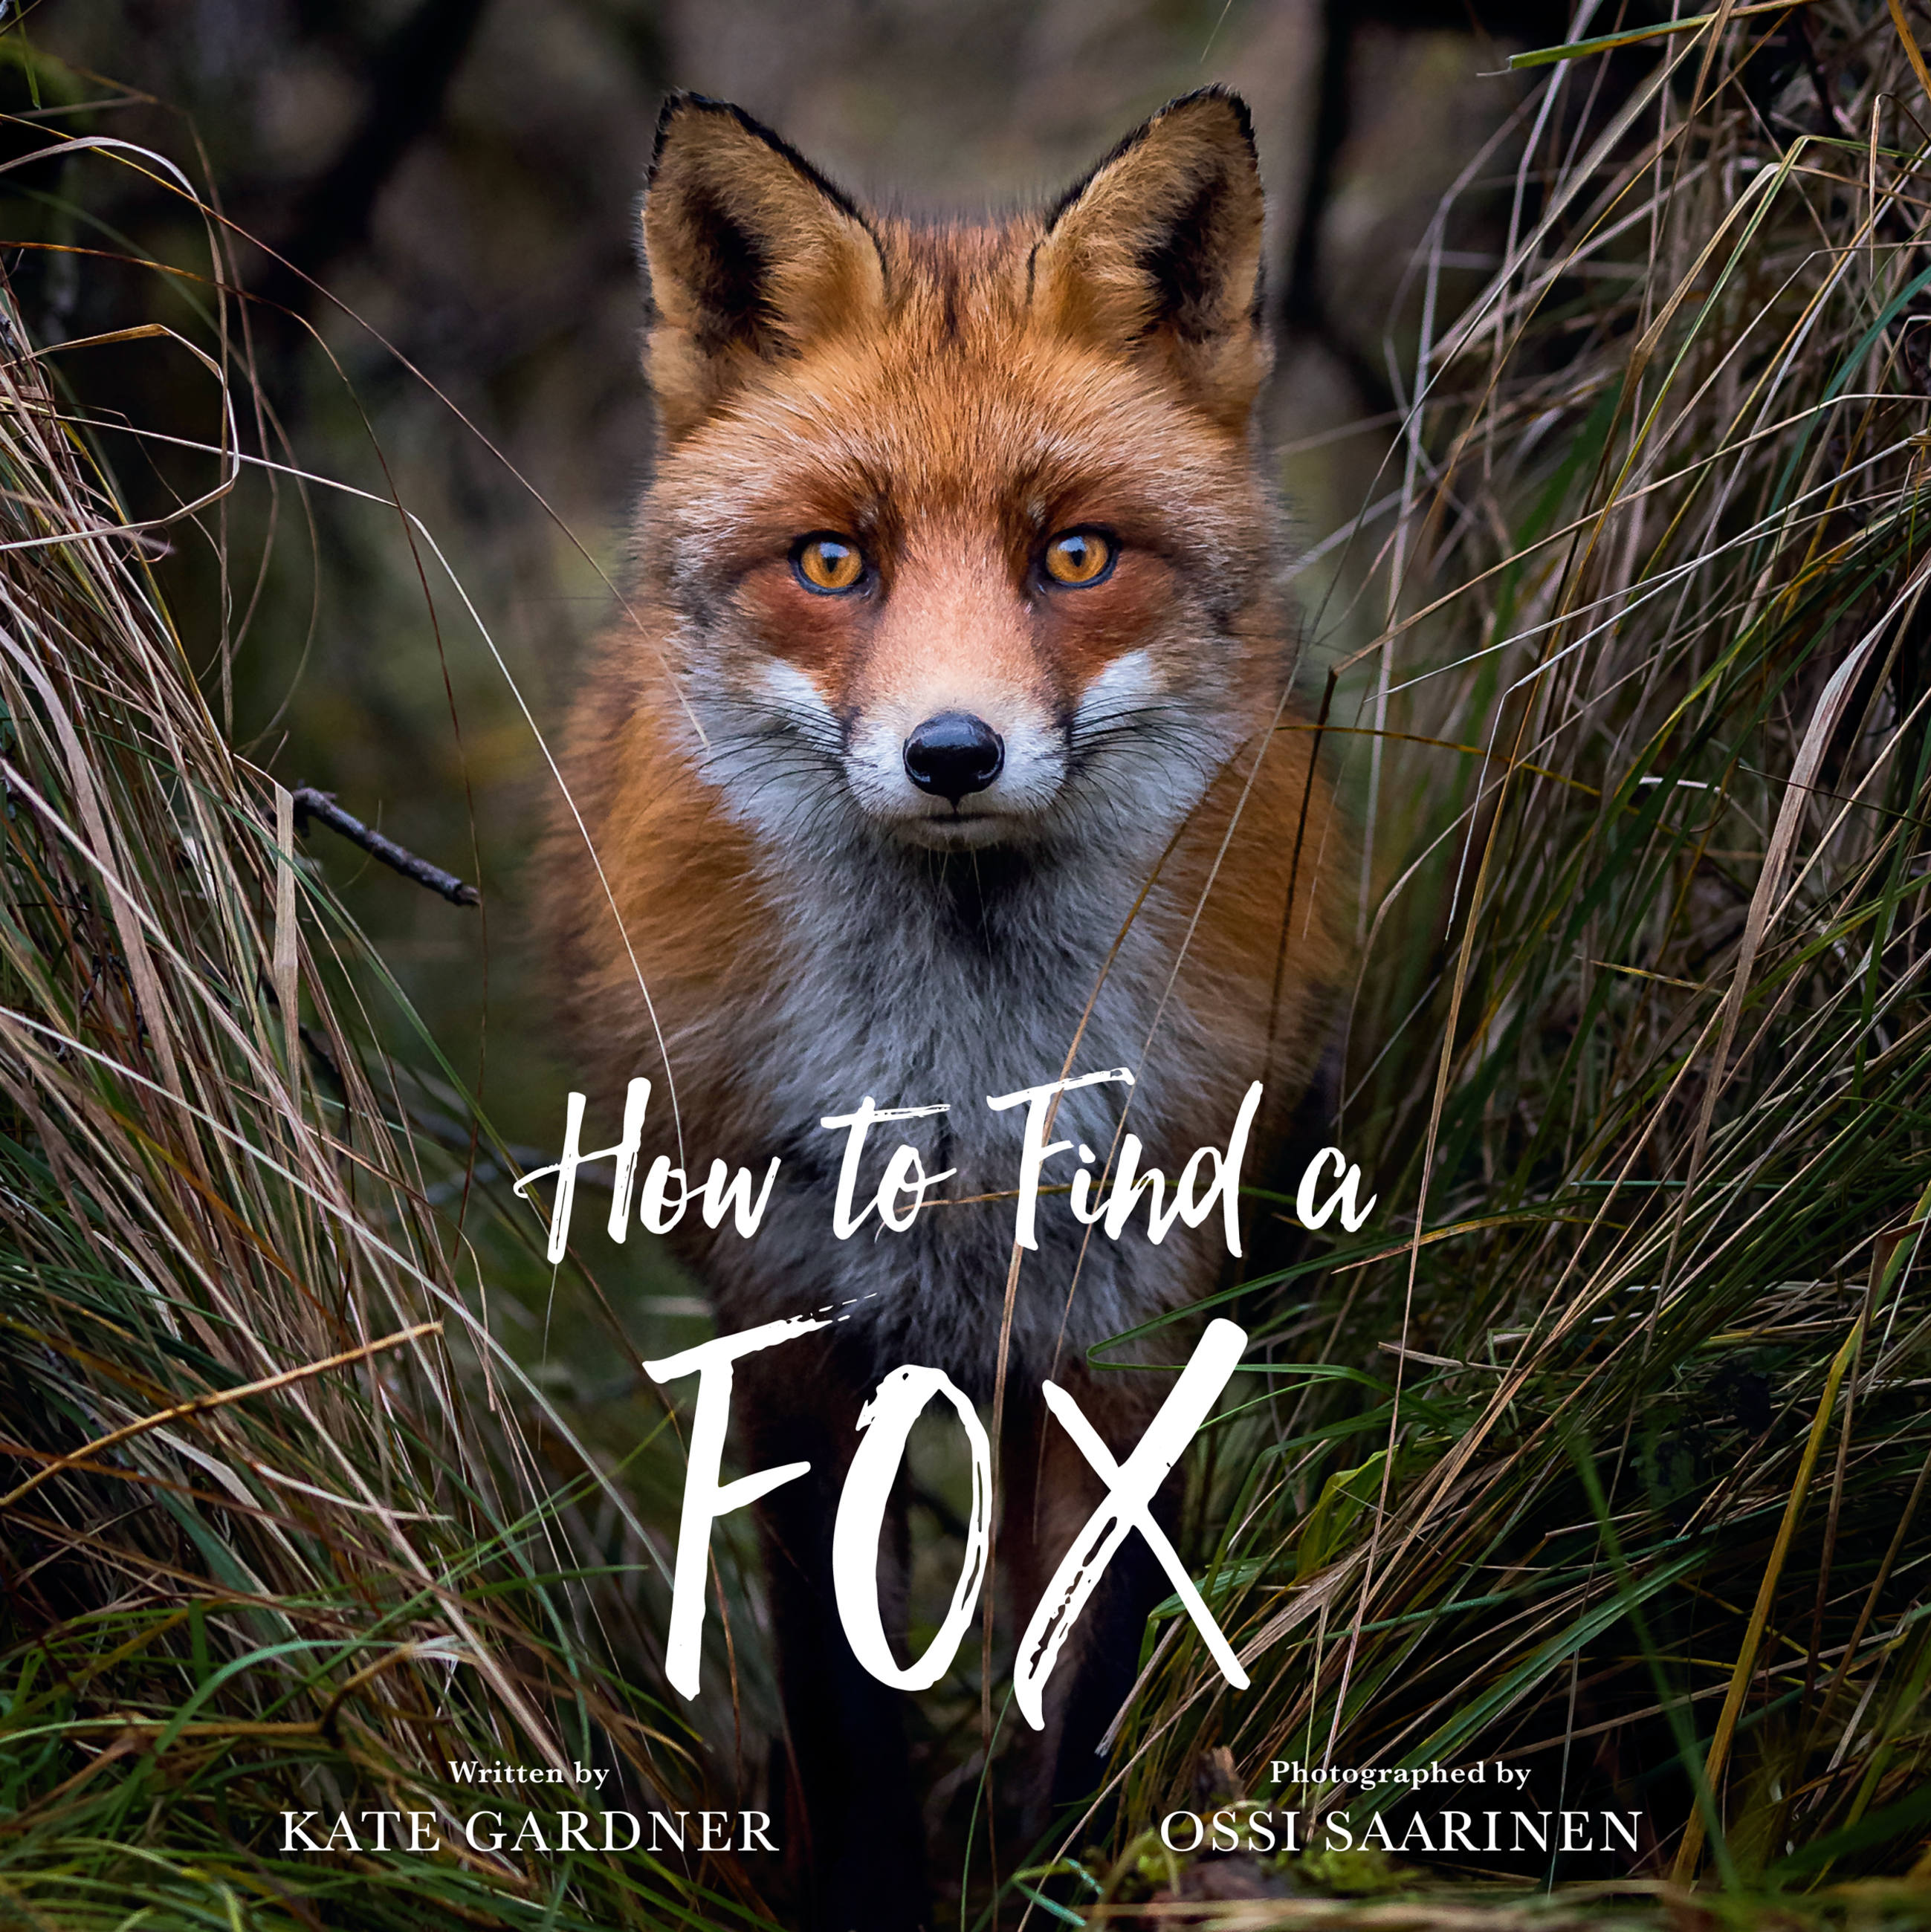 How to Find a Fox by Kate Gardner | Hachette Book Group